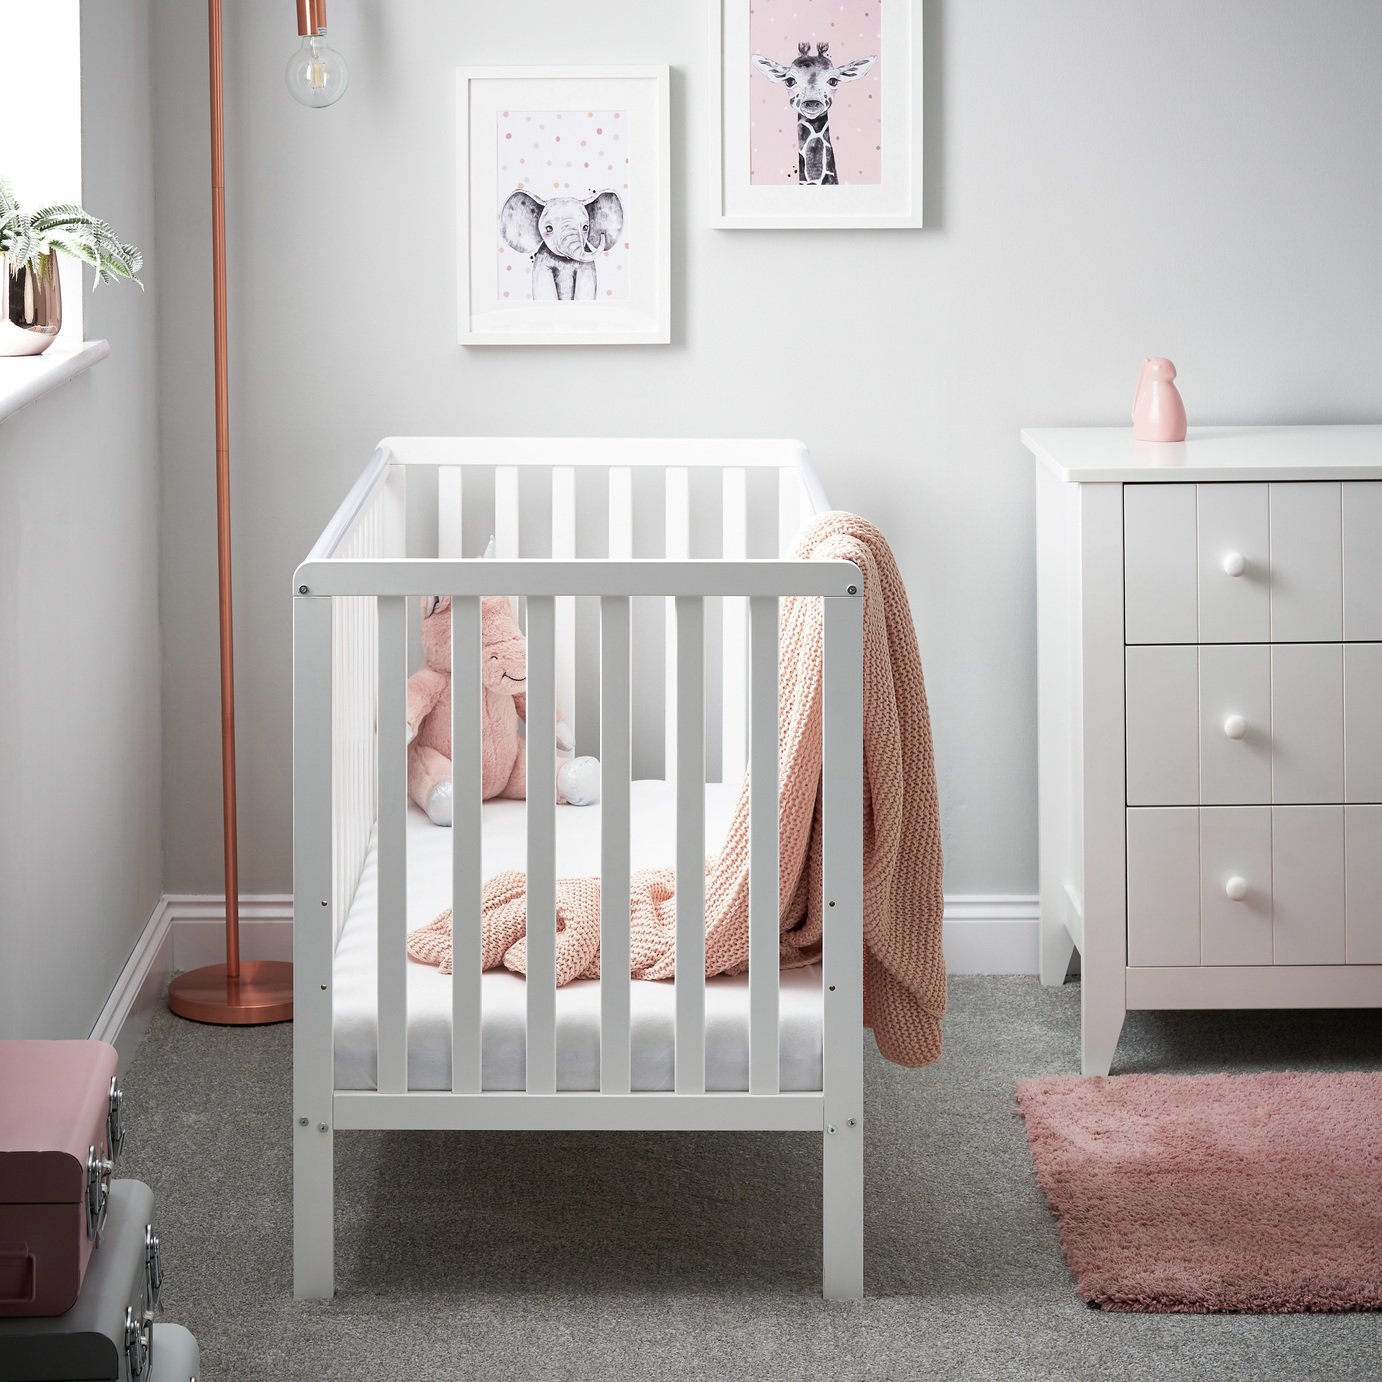 Obaby Bantam Baby Cot Review